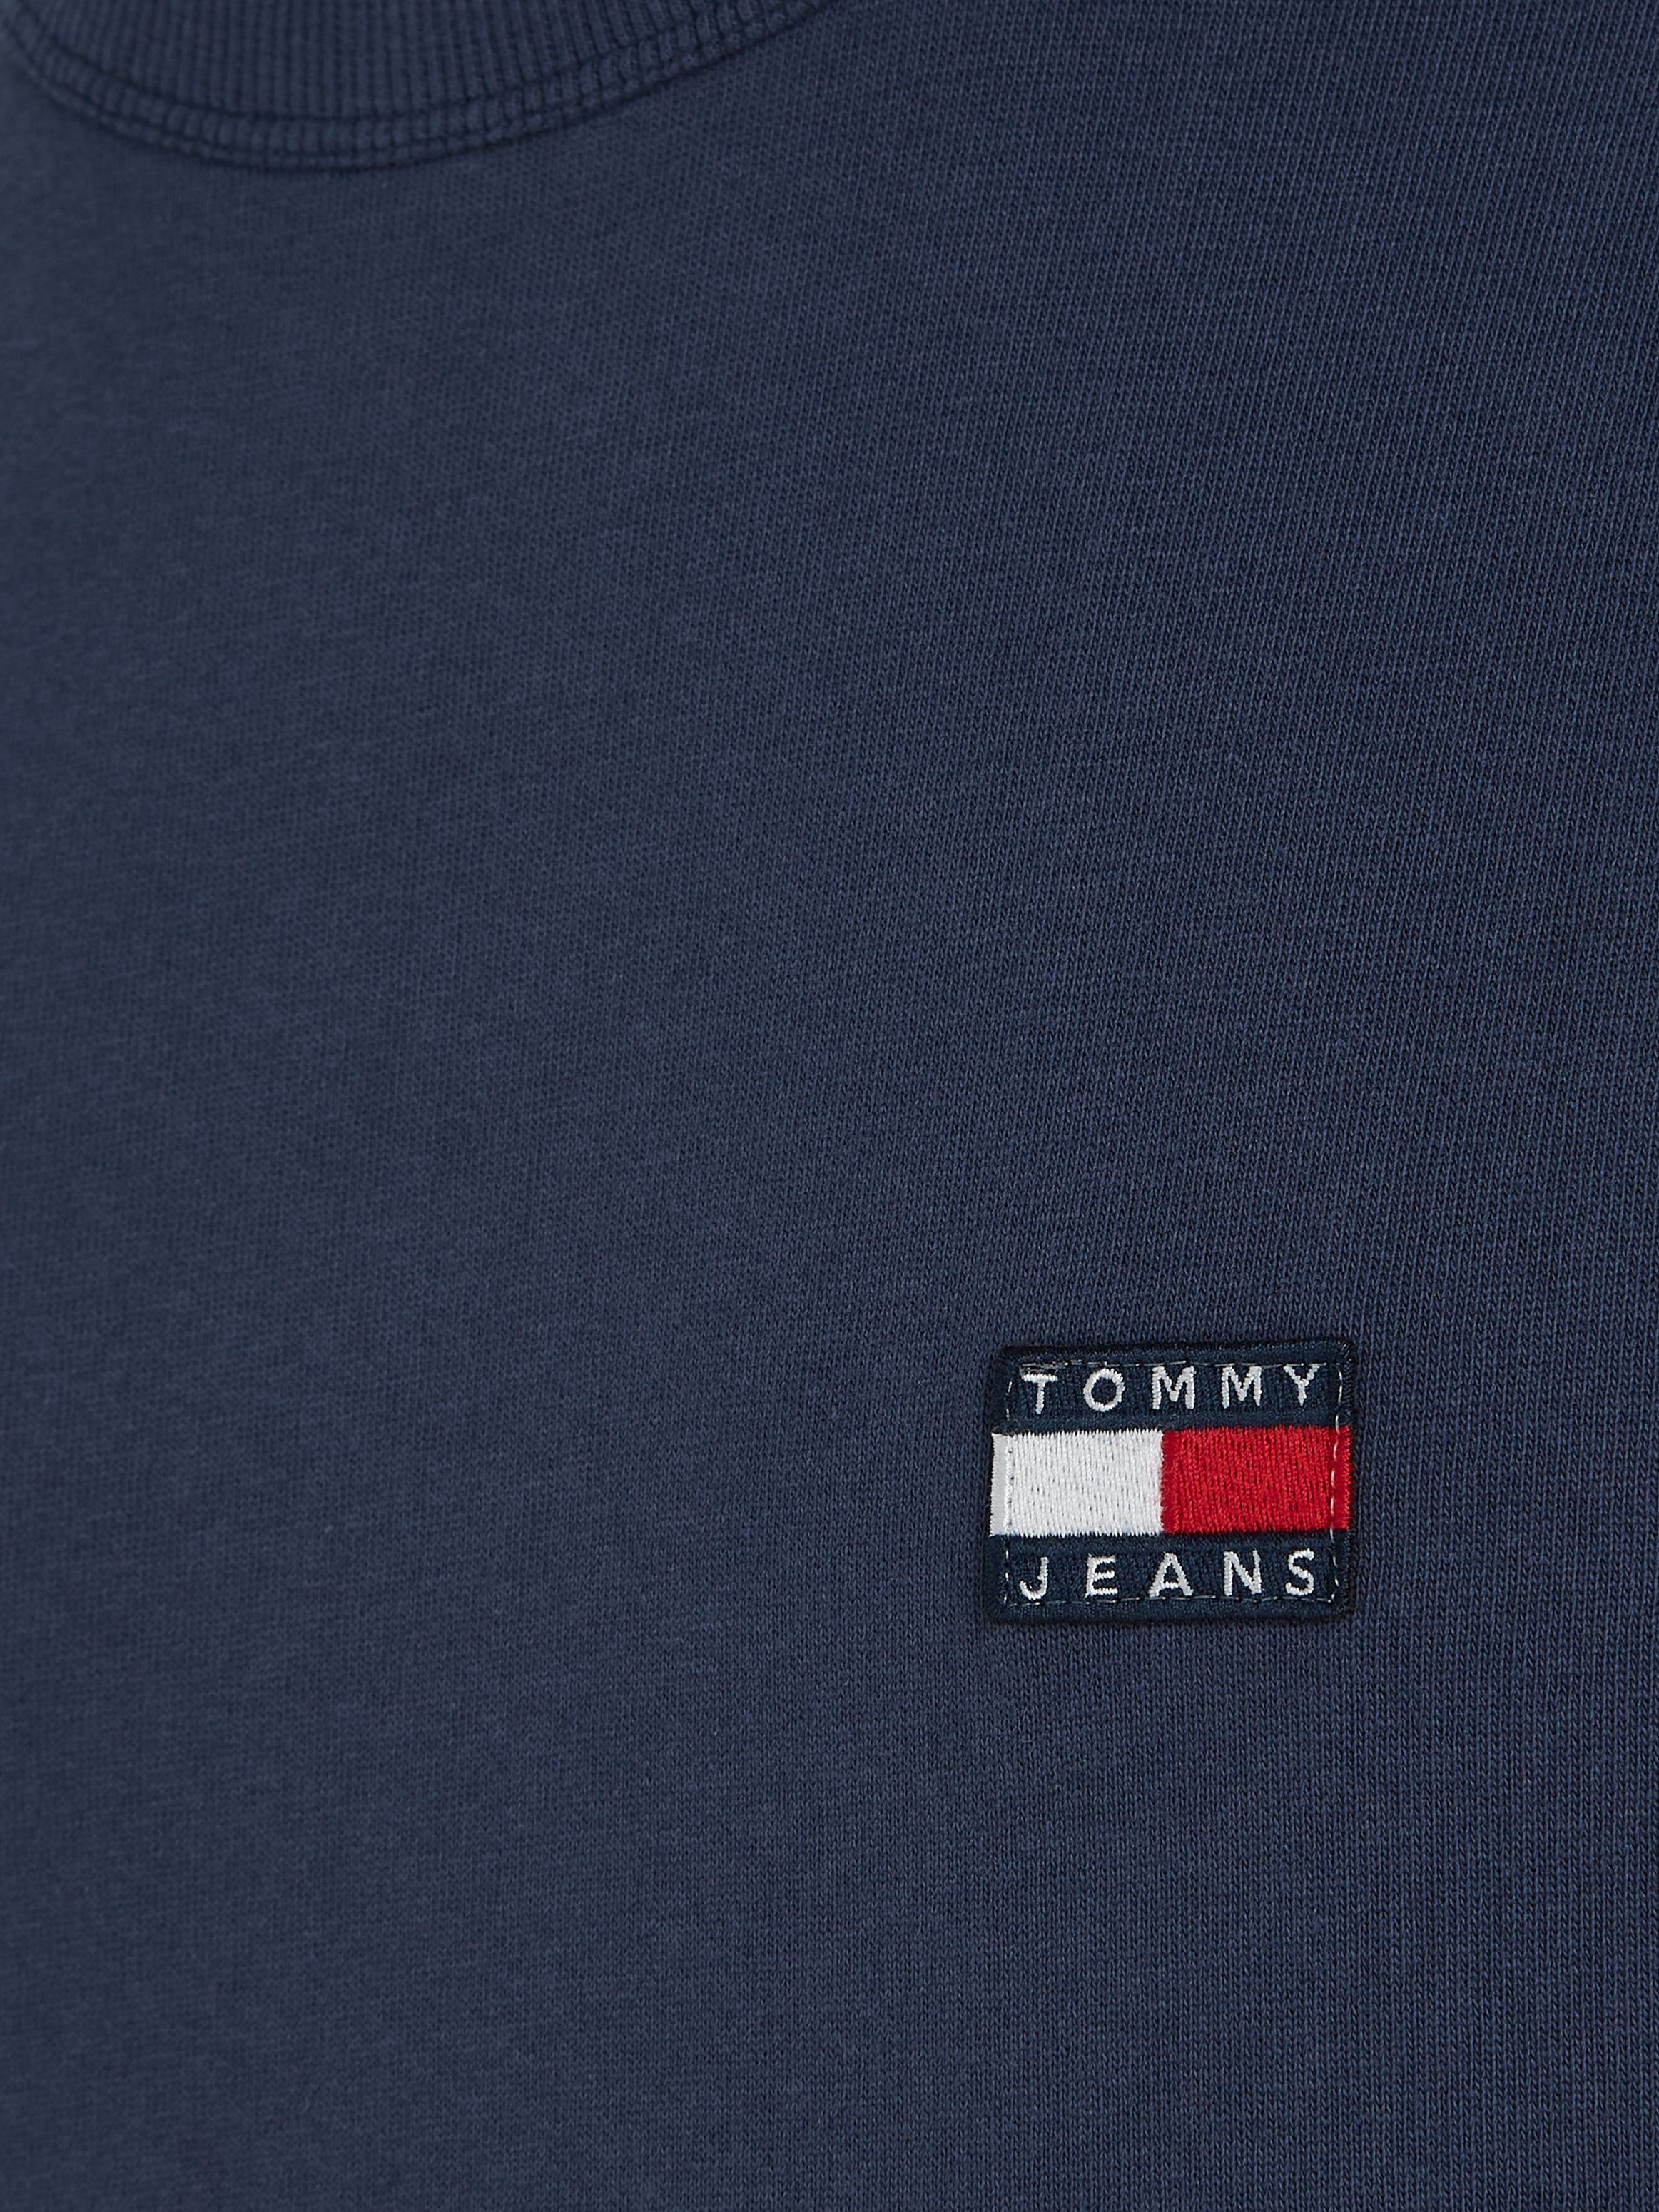 Navy TEE XS Tommy TOMMY CLSC TJM BADGE Jeans T-Shirt Twilight